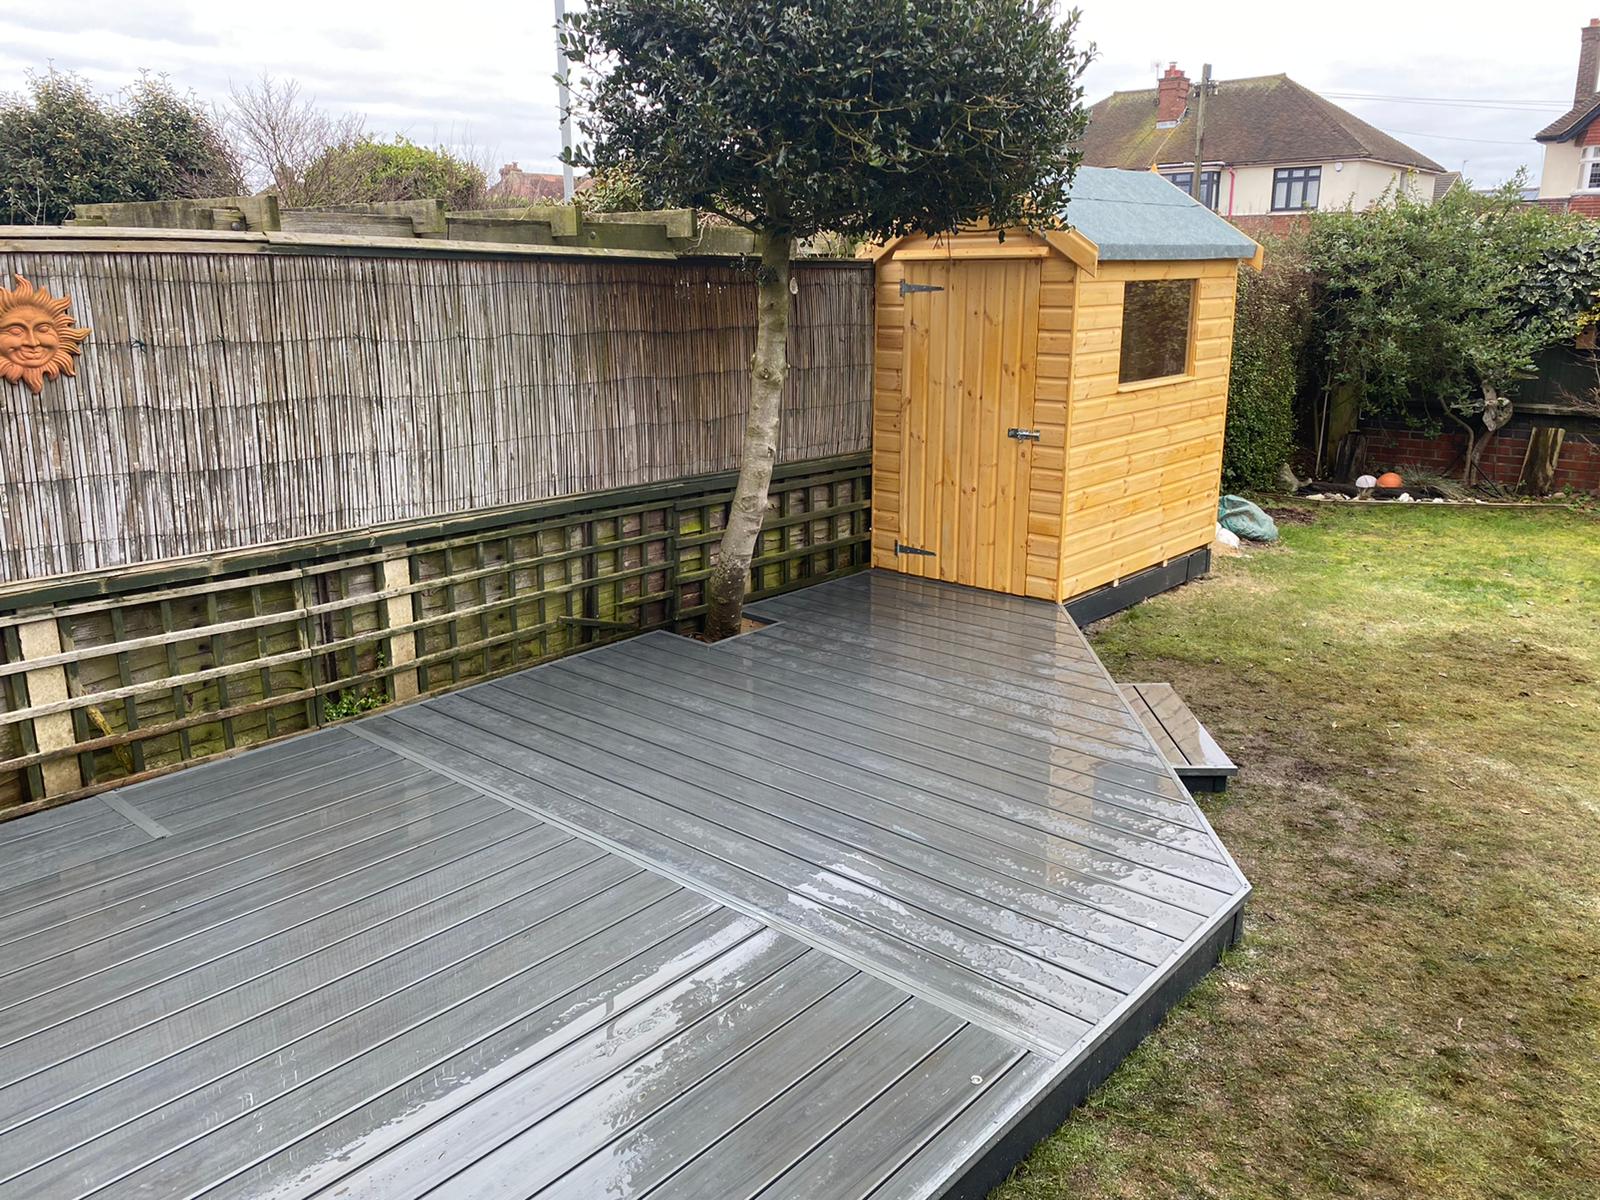 https://themayfieldgroup.co.uk/wp-content/uploads/2021/04/bespoke-sheds-and-decking.jpg